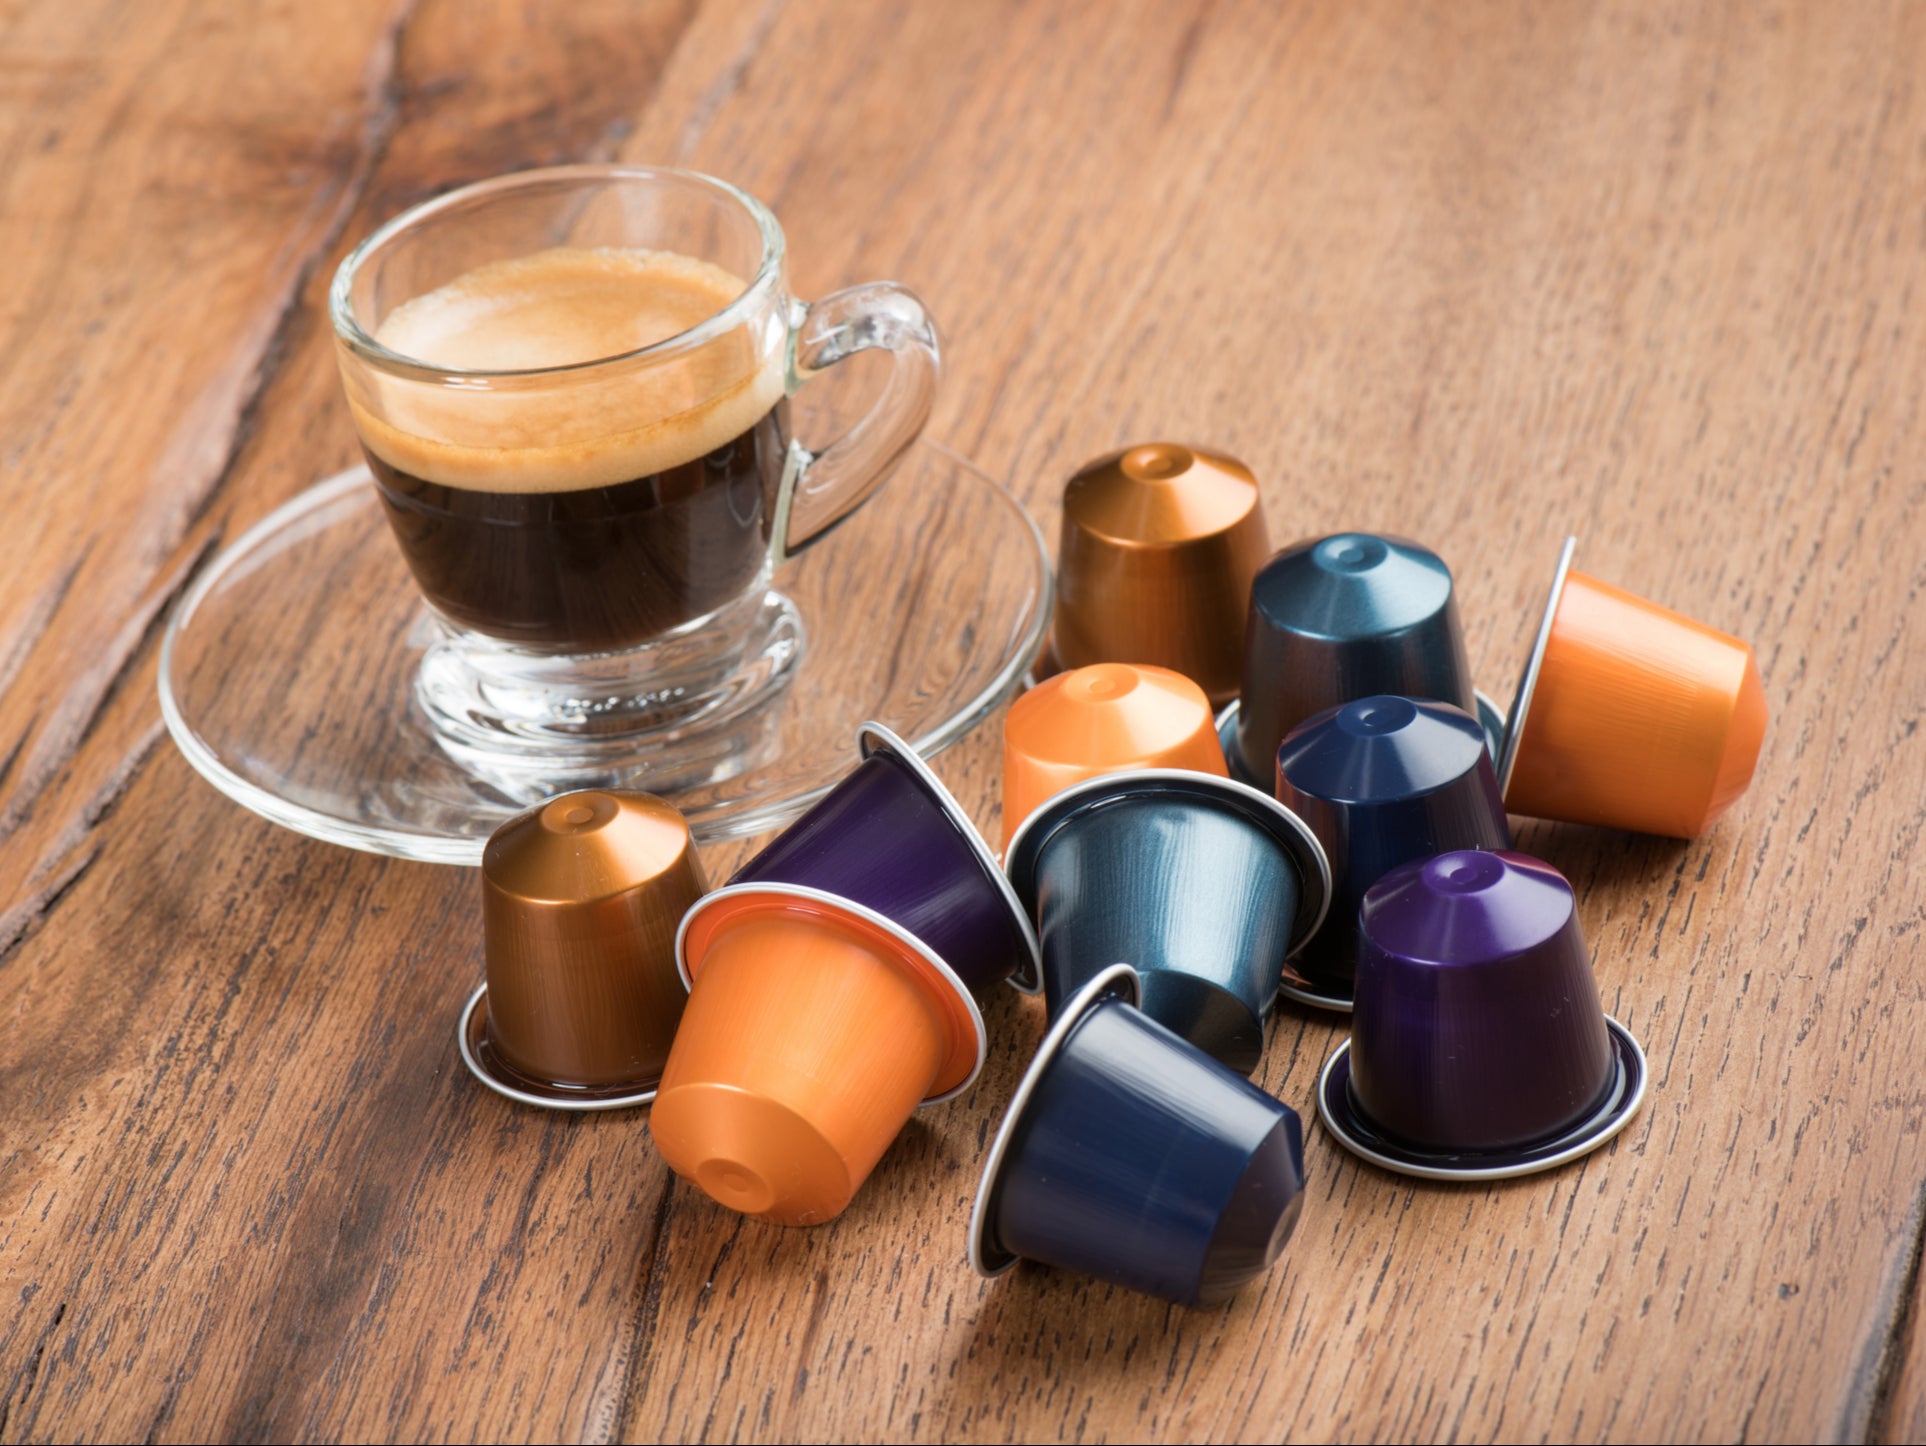 Coffee Capsules: Aluminum Waste, Environmental Damage and More